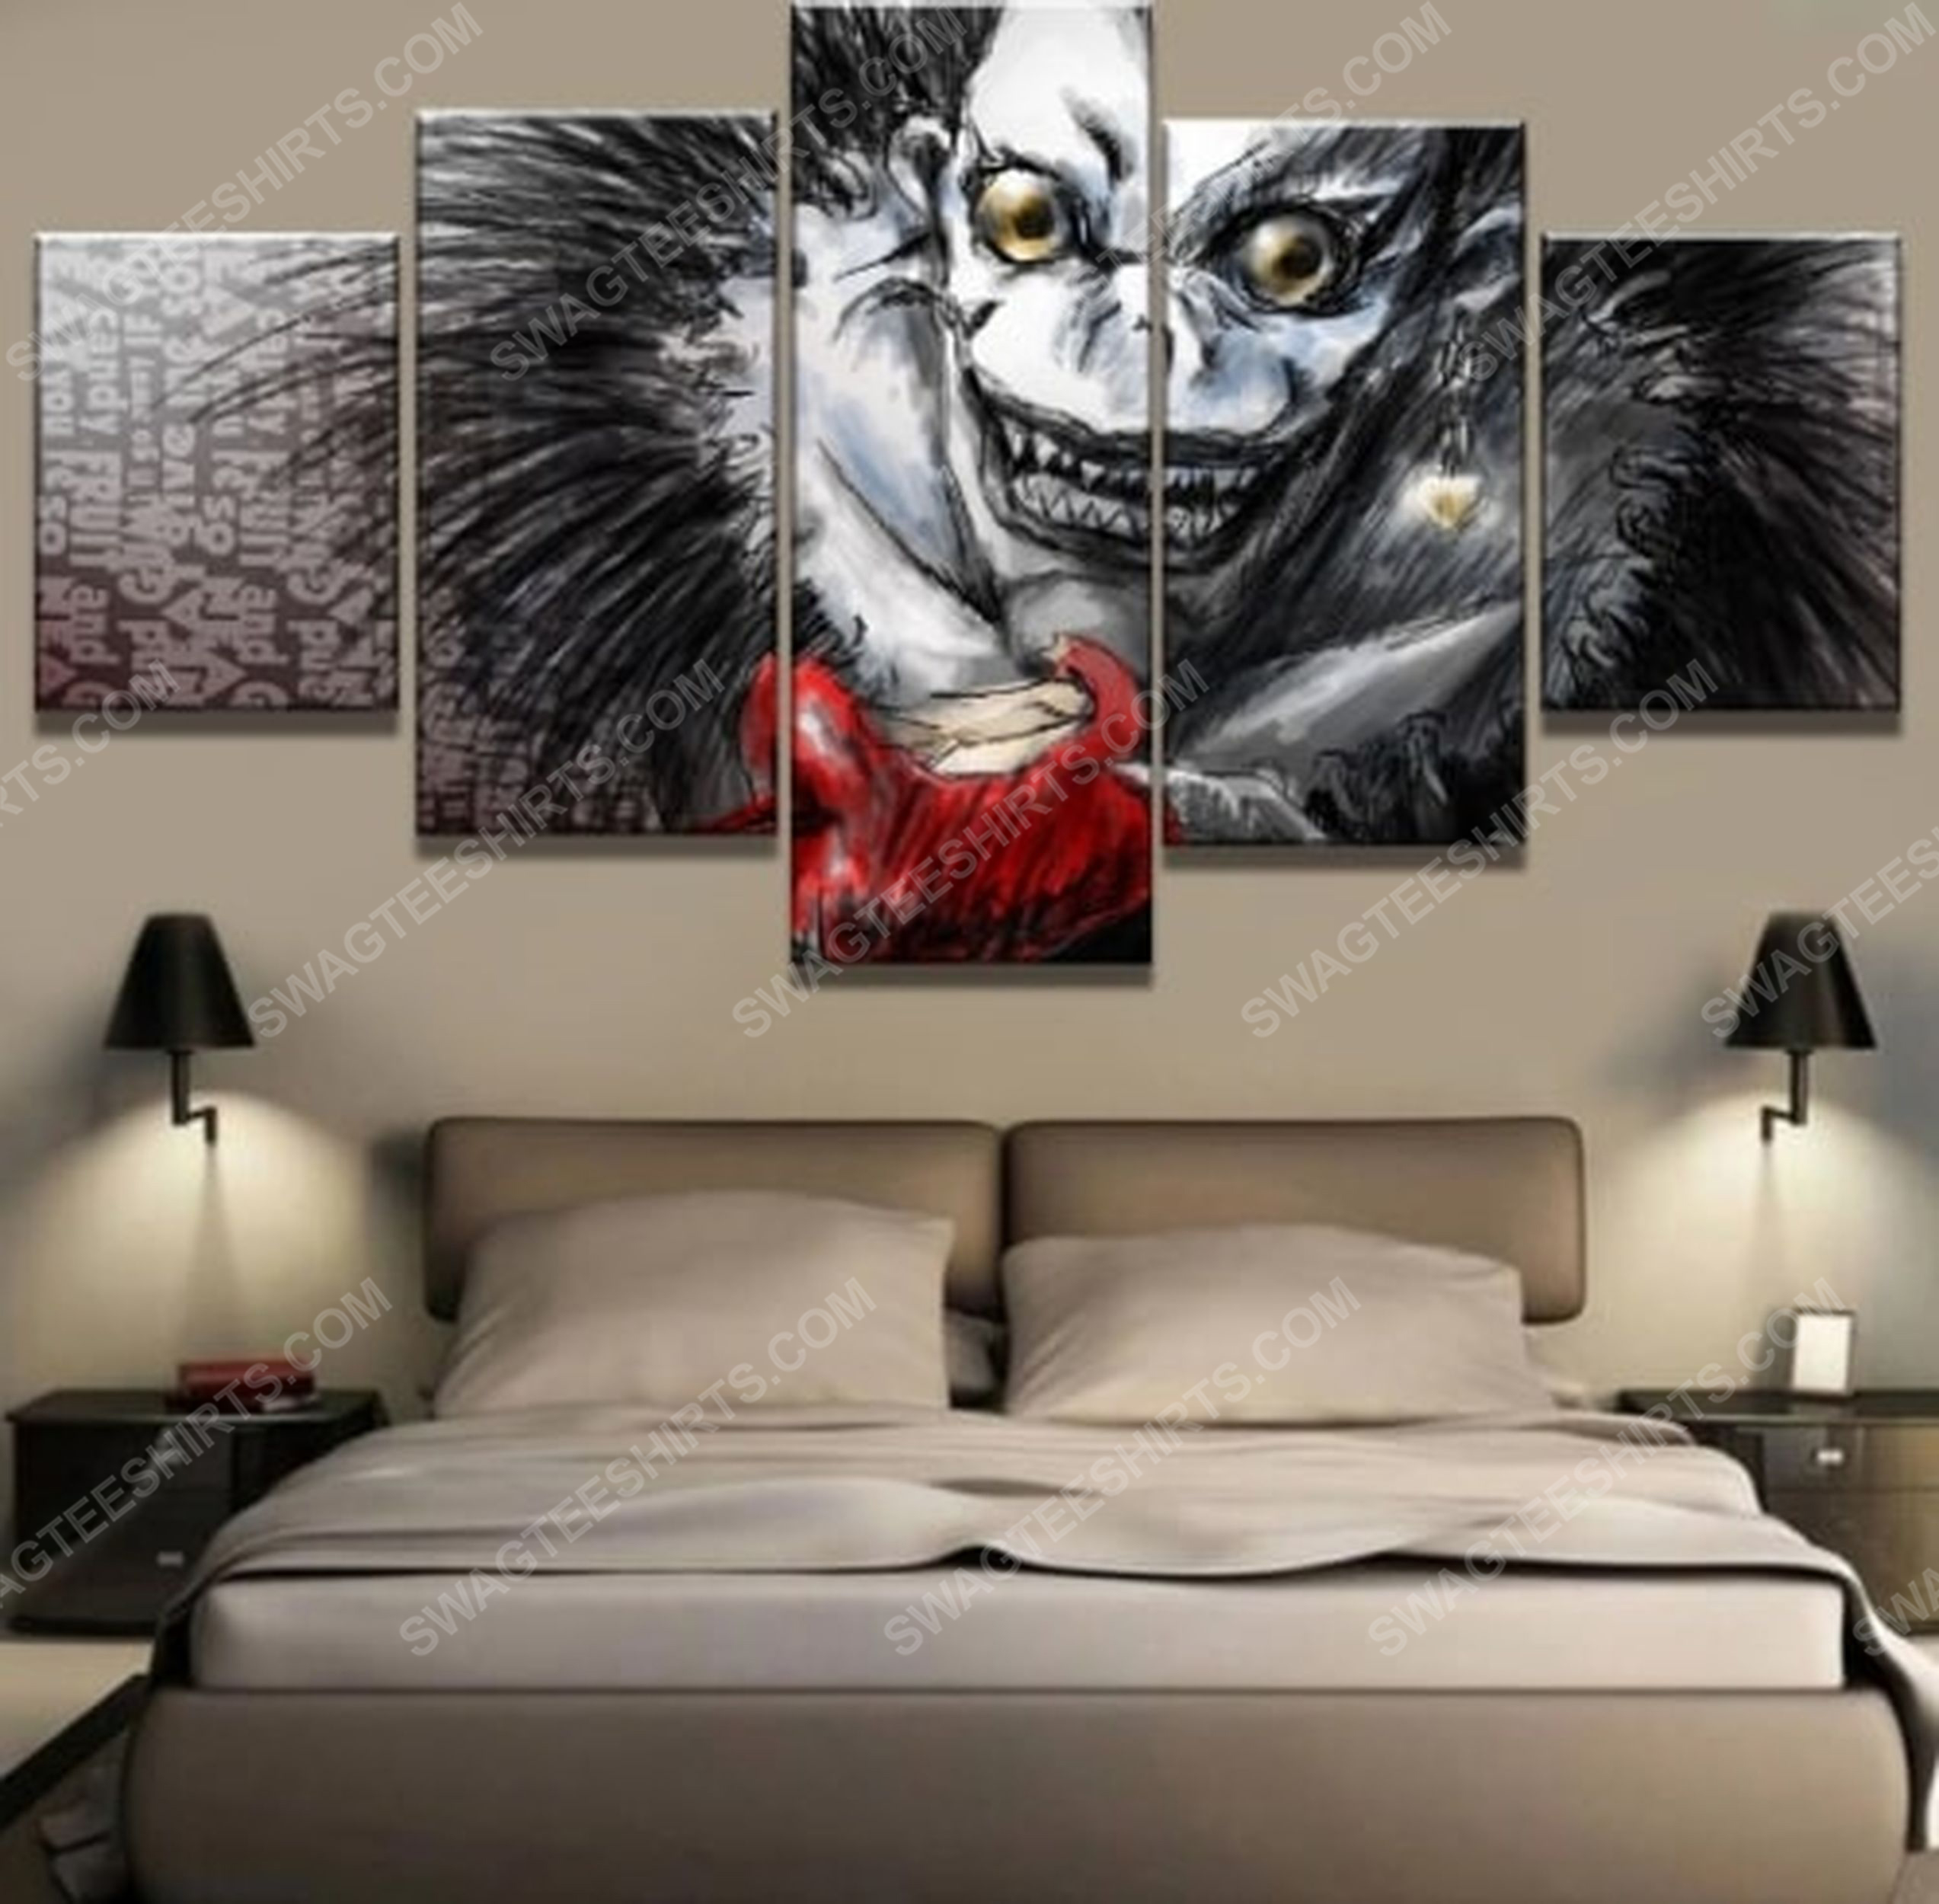 [special edition] The death note ryuk print painting canvas wall art home decor – maria